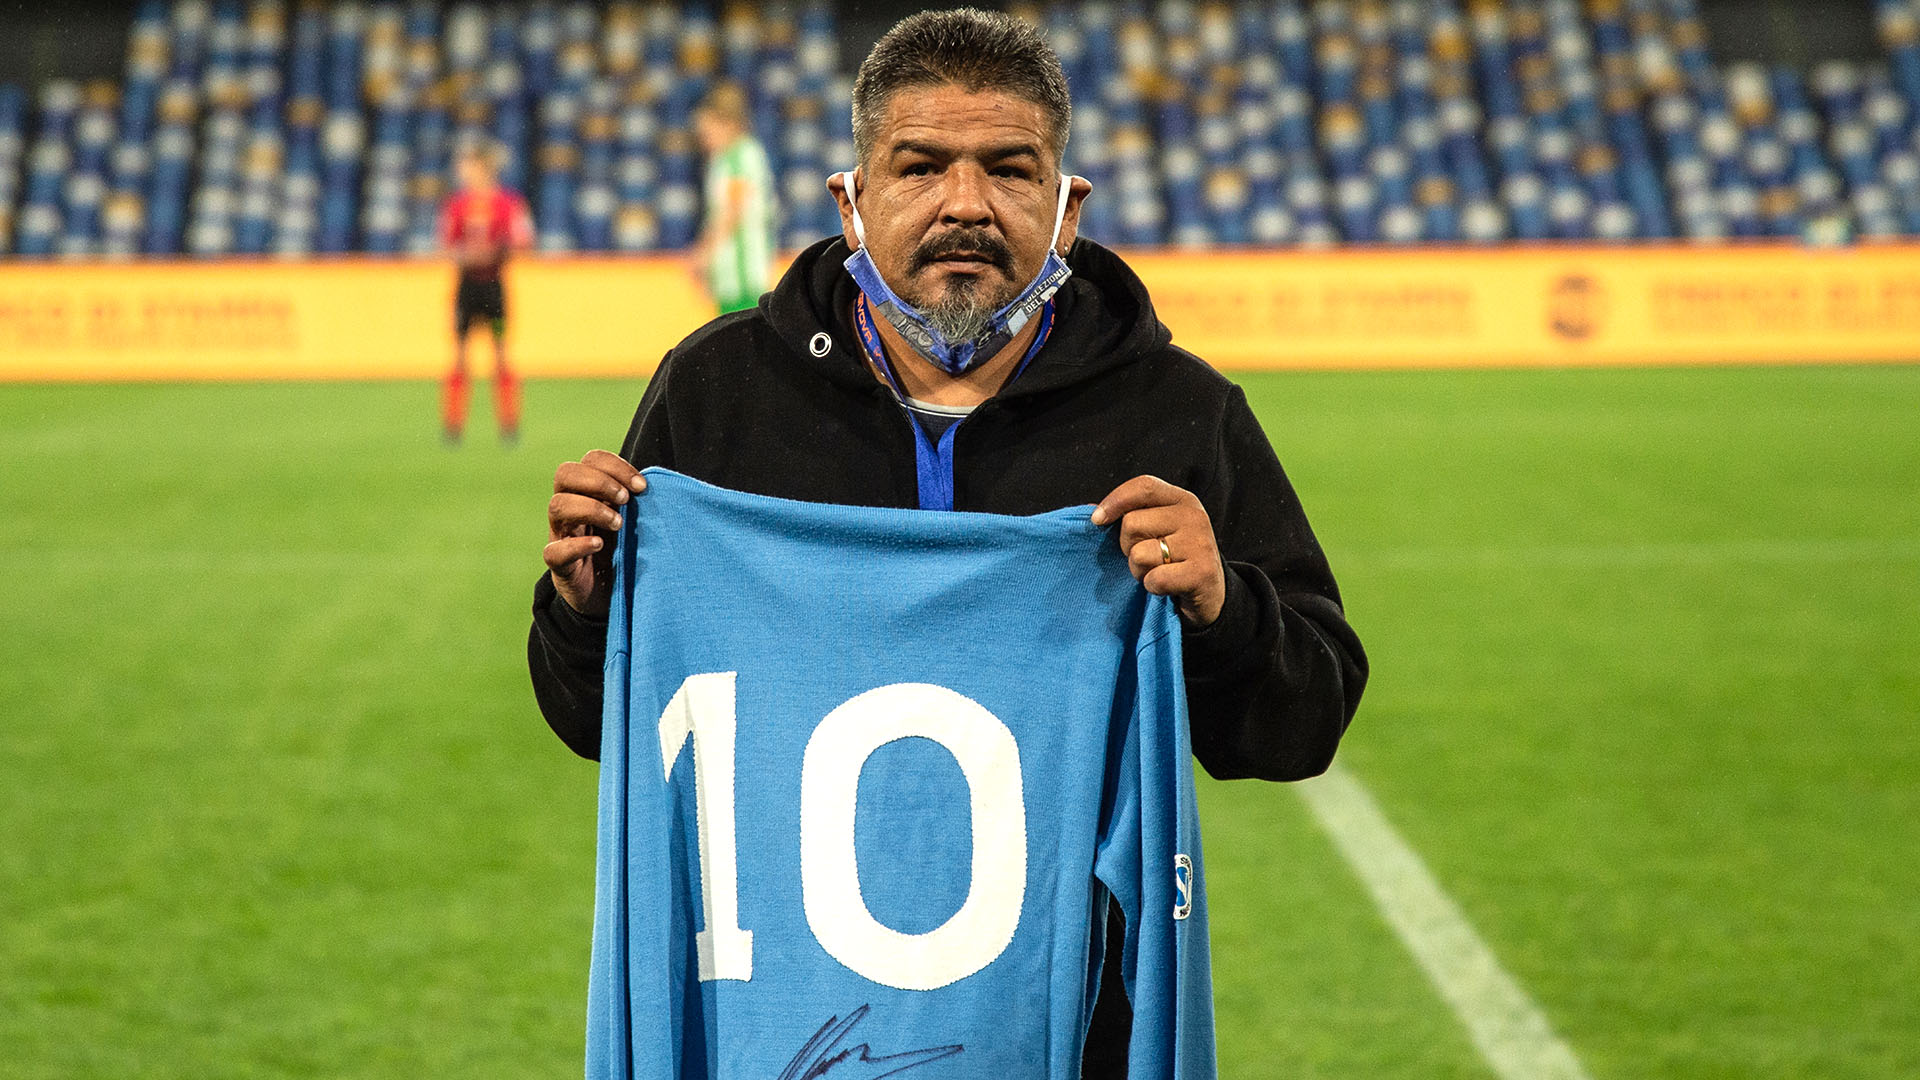 NAPLES, ITALY - MAY 24: In this image released on June the 2nd, soccer coach Hugo Maradona brother of Diego during the match honoring soccer player Diego Armando Maradona on May 24, 2021 in Naples, Italy. (Photo by Ivan Romano/Getty Images)